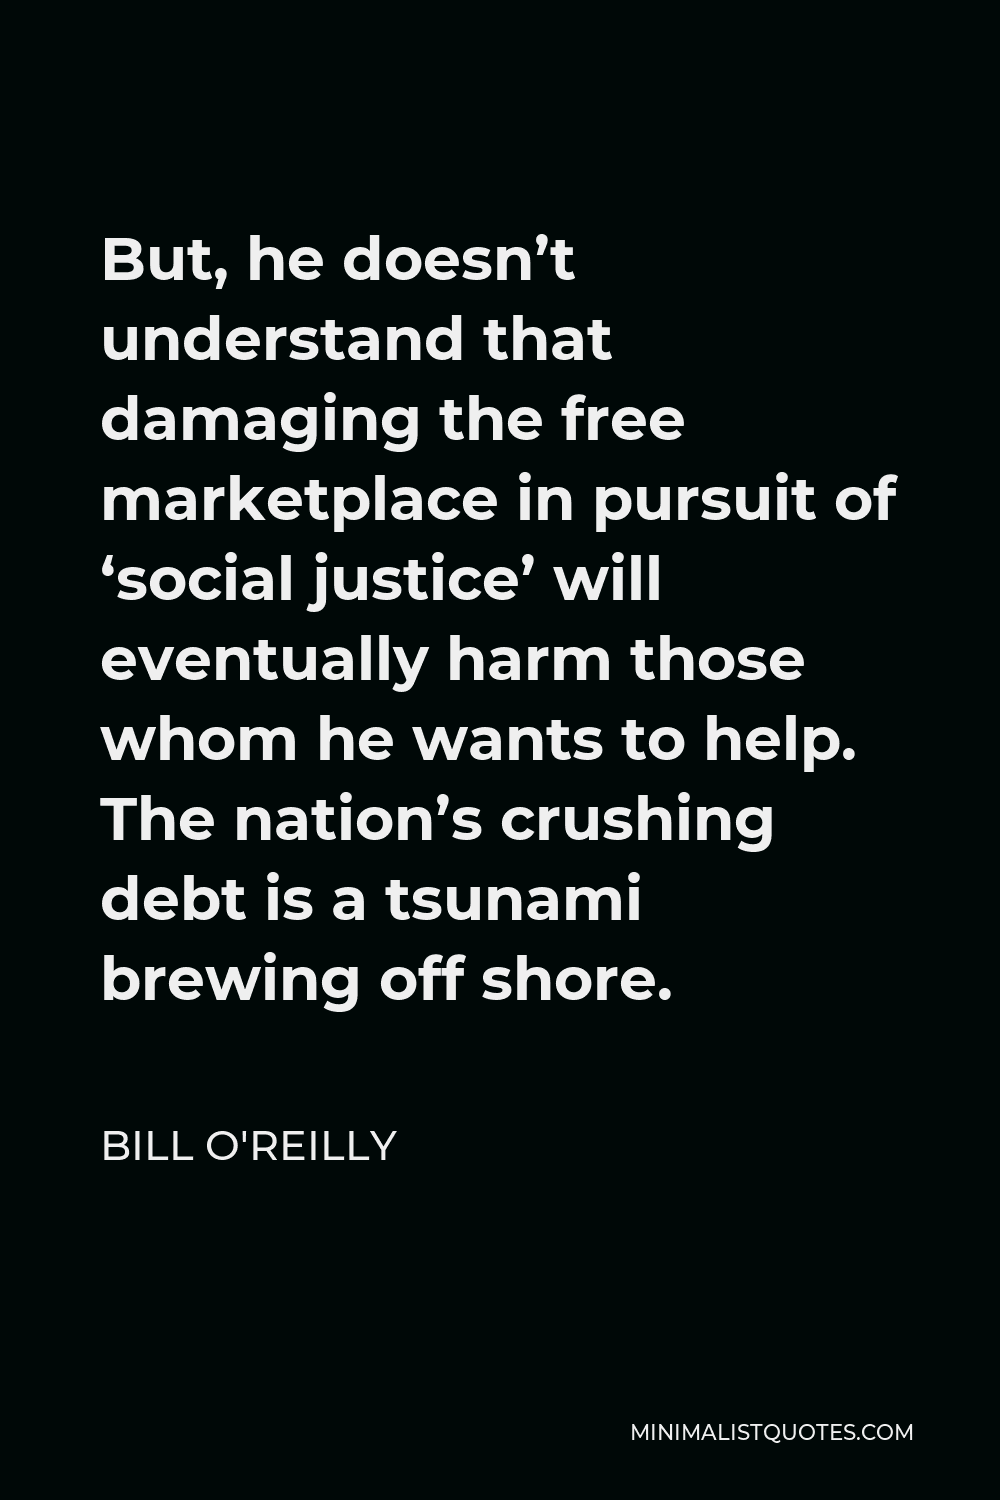 Bill O'Reilly Quote - But, he doesn’t understand that damaging the free marketplace in pursuit of ‘social justice’ will eventually harm those whom he wants to help. The nation’s crushing debt is a tsunami brewing off shore.